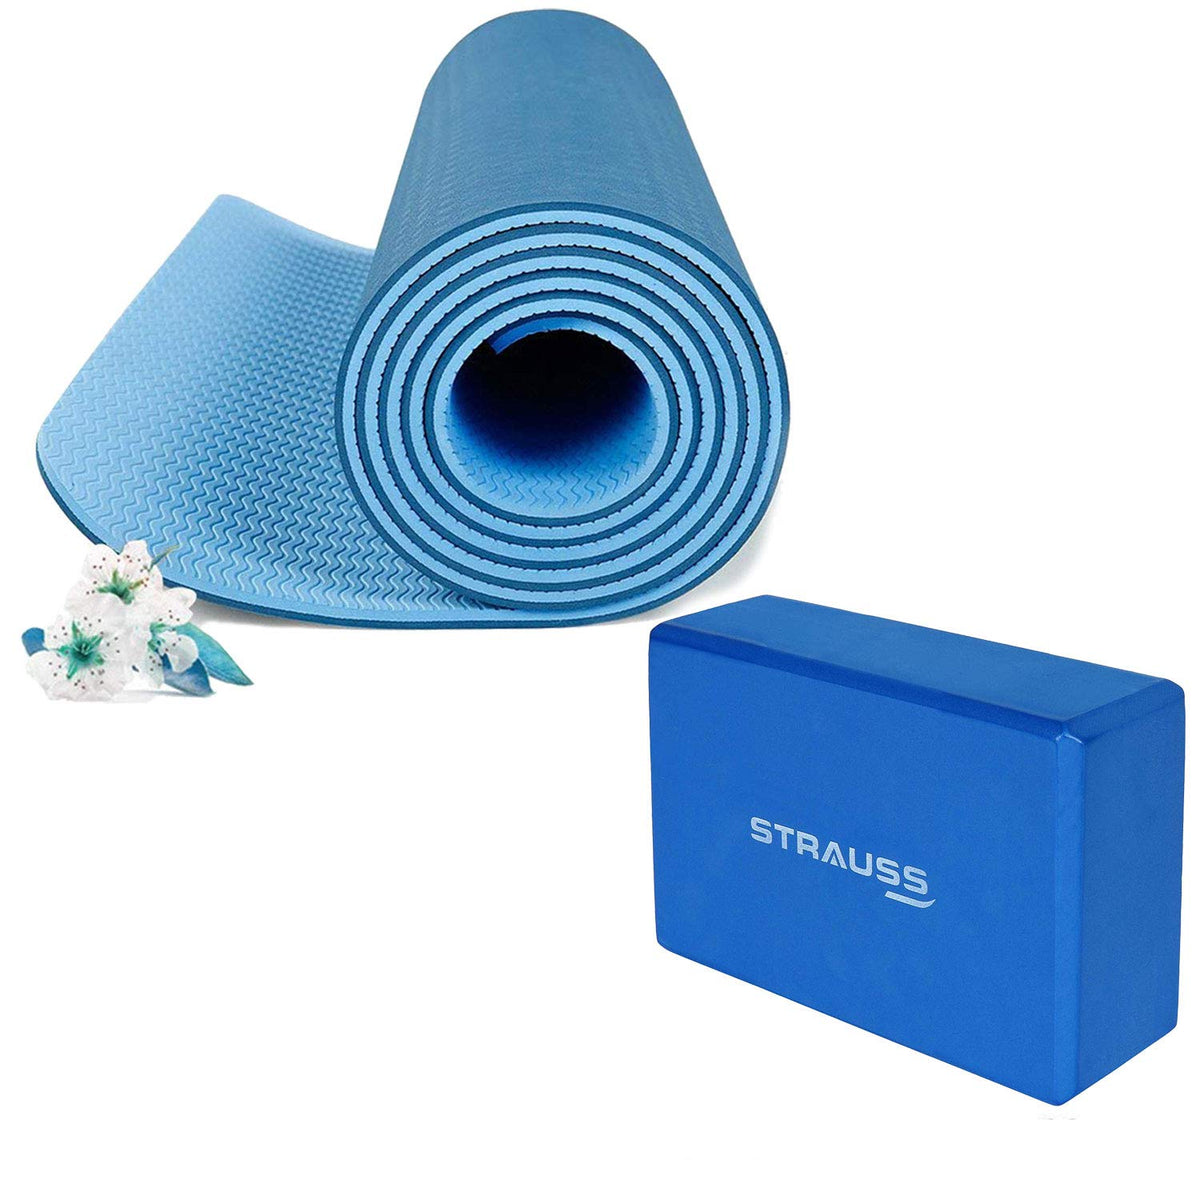 Strauss TPE Eco Friendly Dual Layer Yoga Mat, 6mm (Blue) and Yoga Block (Navy)